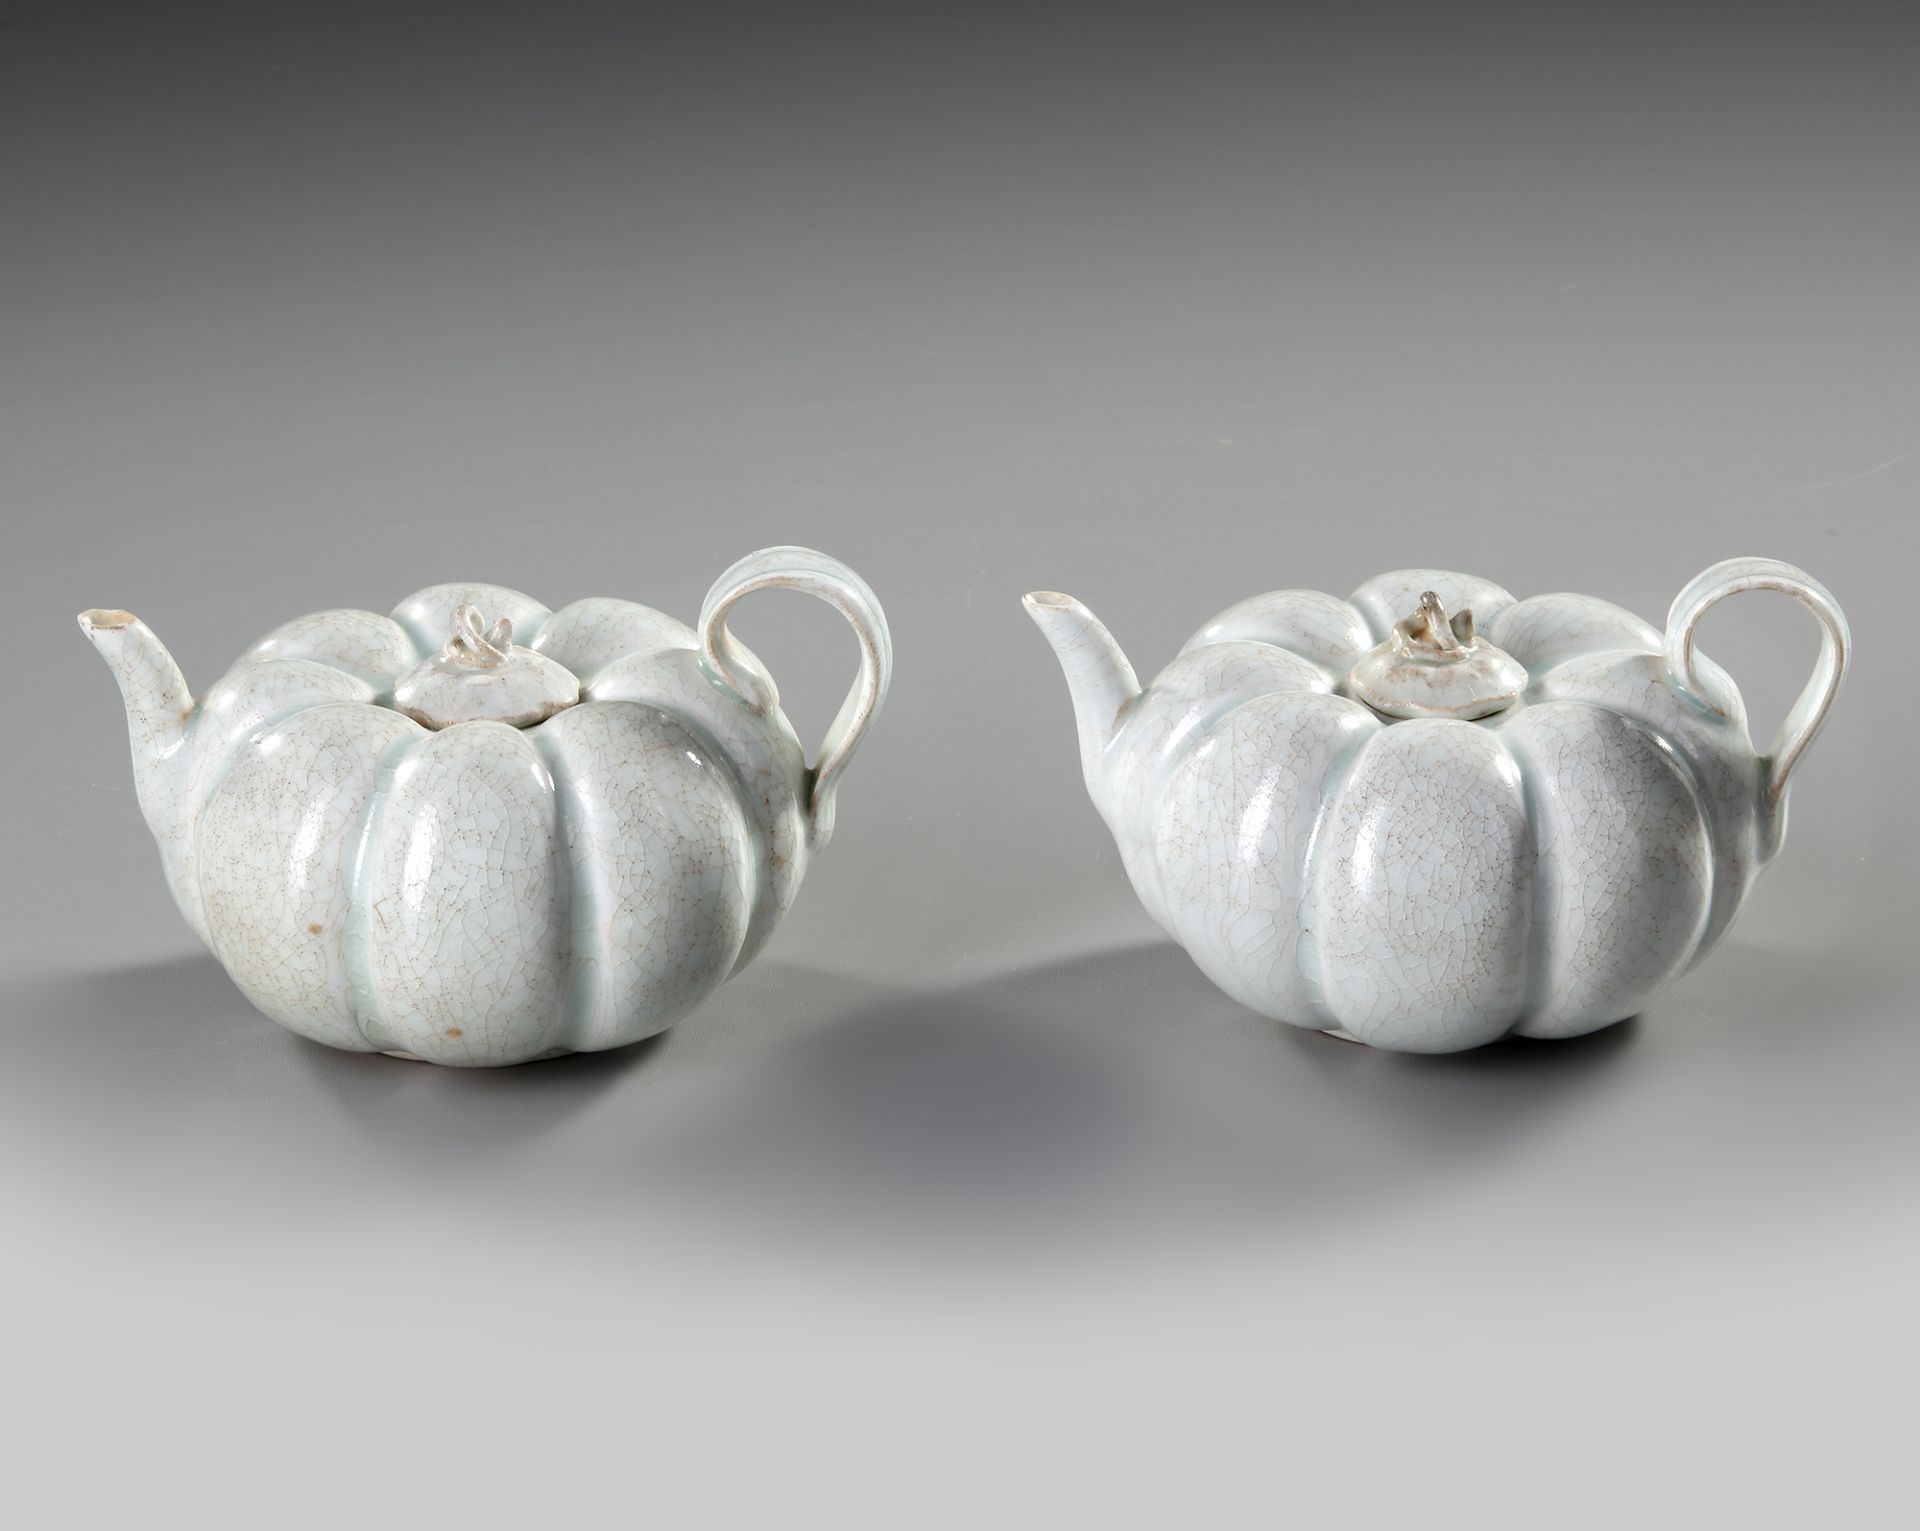 A PAIR OF CHINESE 'QINGBAI' TEAPOTS WITH COVERS, SOUTHERN SONG (1127-1279) - Image 2 of 4